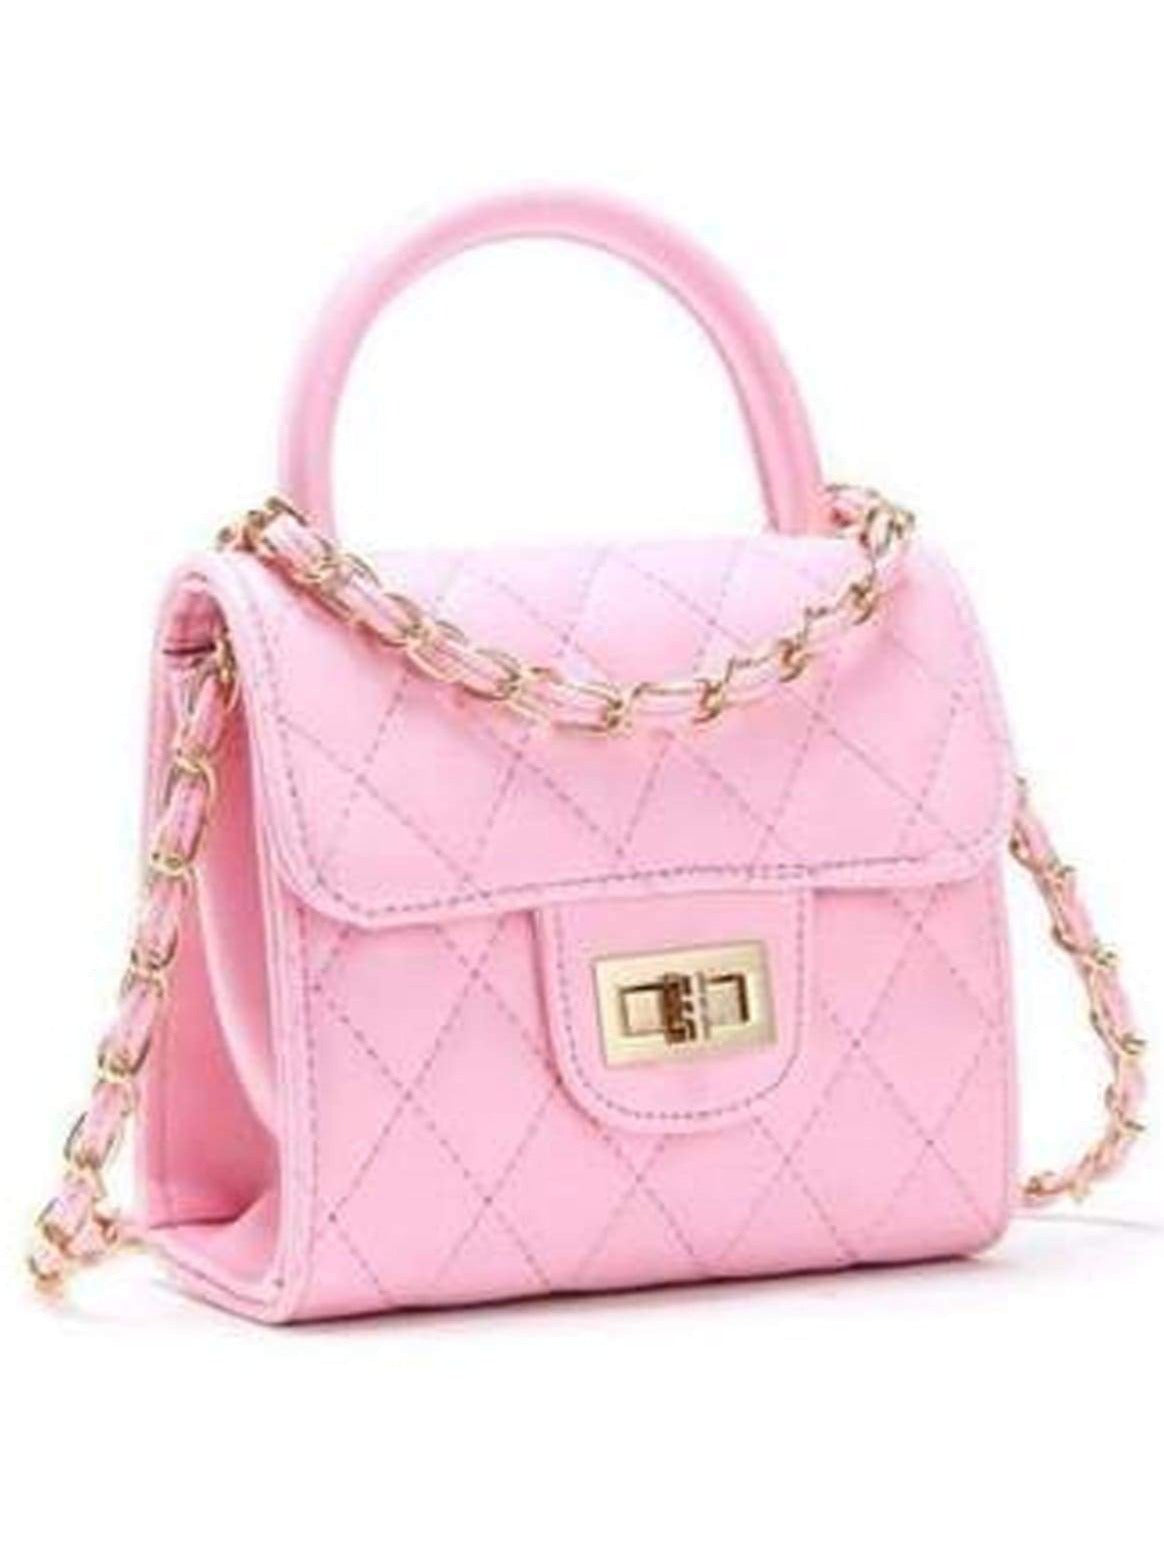 Girls Purses in Girls' Backpacks & Accessories